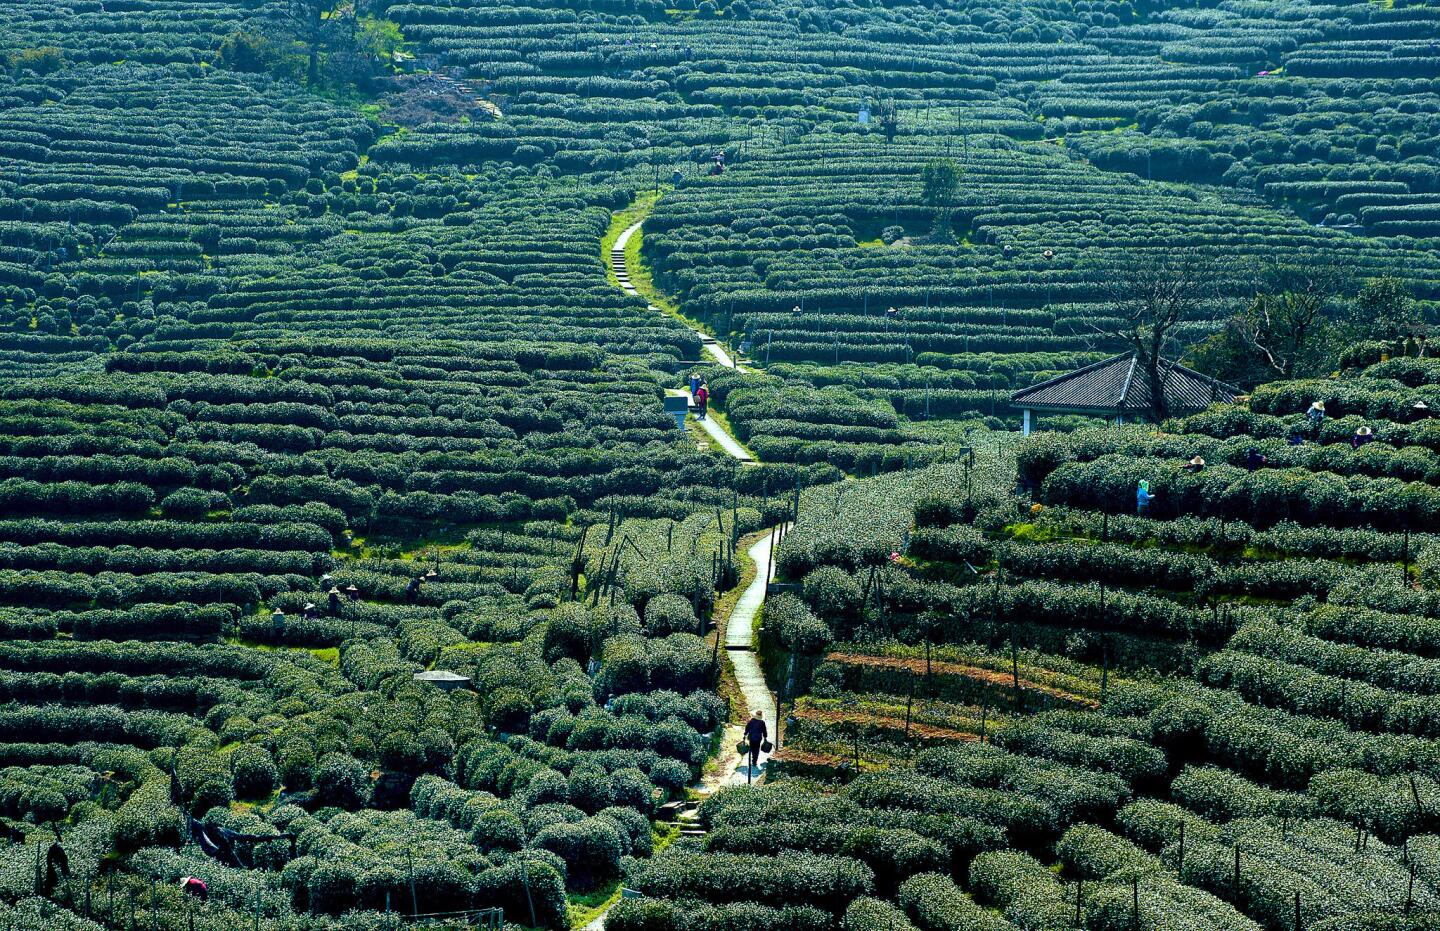 Some of the world's most coveted green tea grows in Hangzhou, China. Longjing, or Dragon Well, tea is a key commodity in Weng Jia Shan, in the mountains outside Hangzhou.